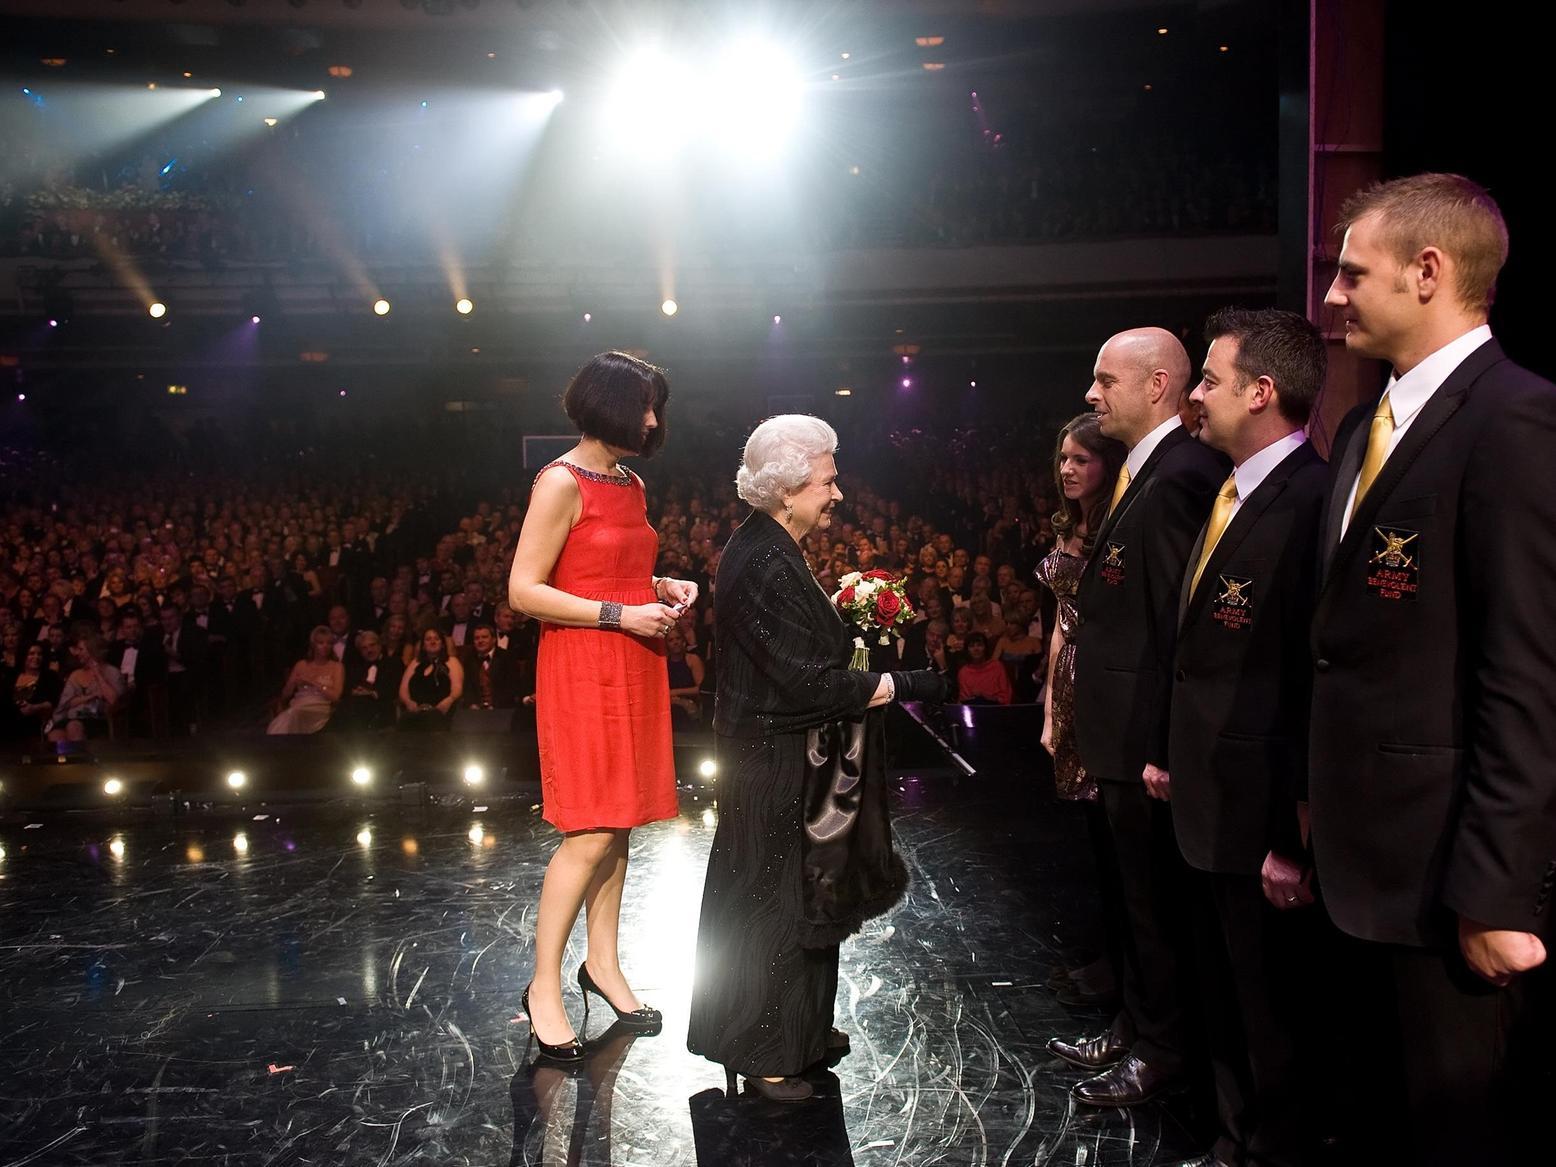 The Queen meets guests at the Royal Variety Show in 2009